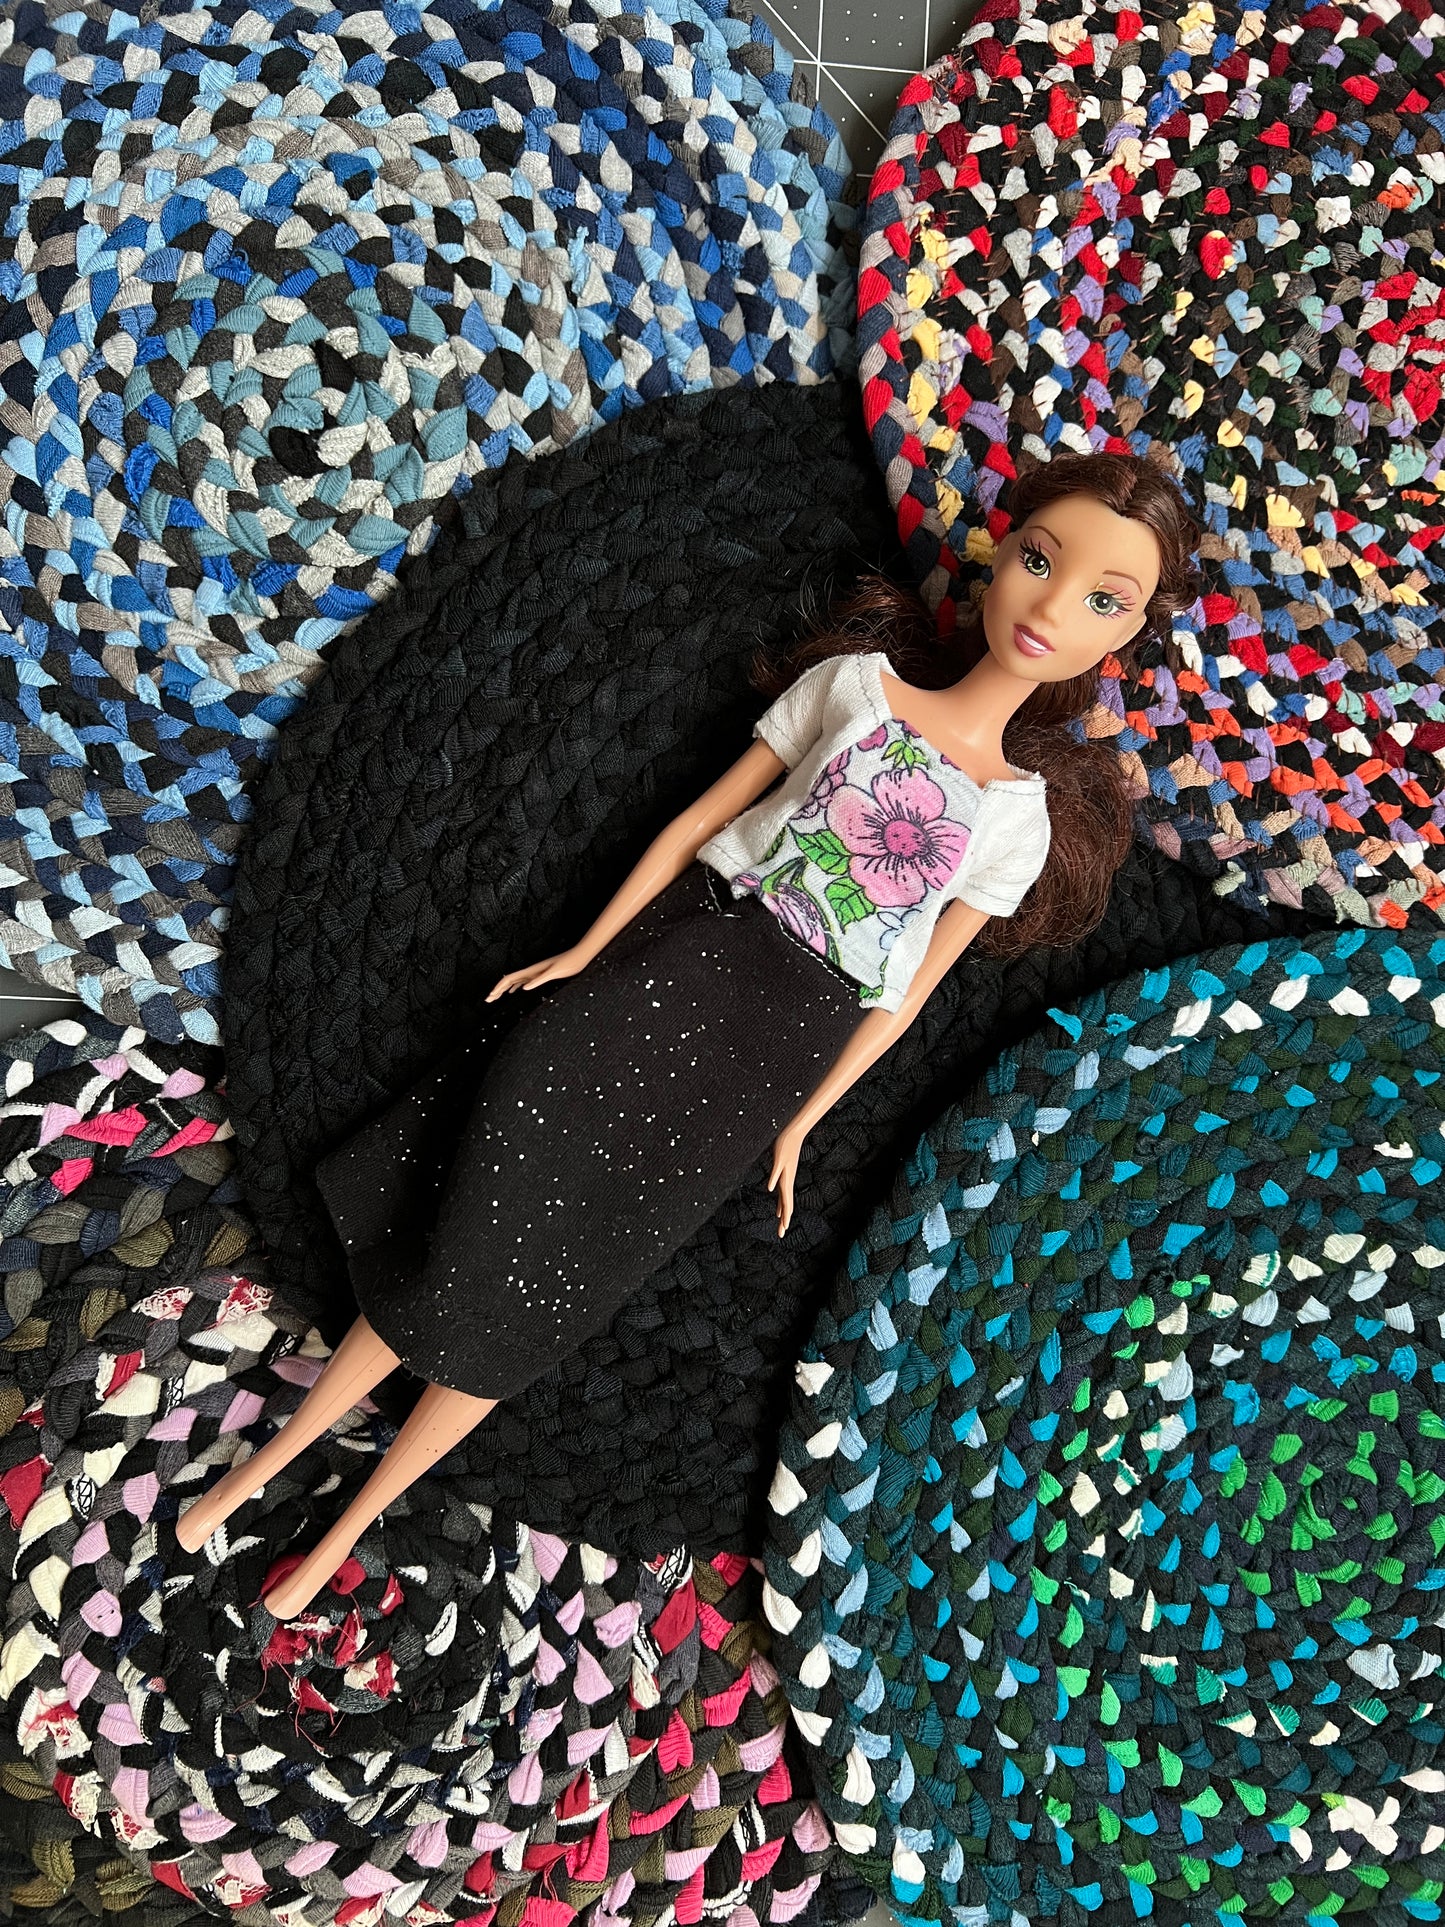 Barbie doll lays on top of 11" miniature dollhouse rugs, they would be perfect in a Barbie Dreamhouse!